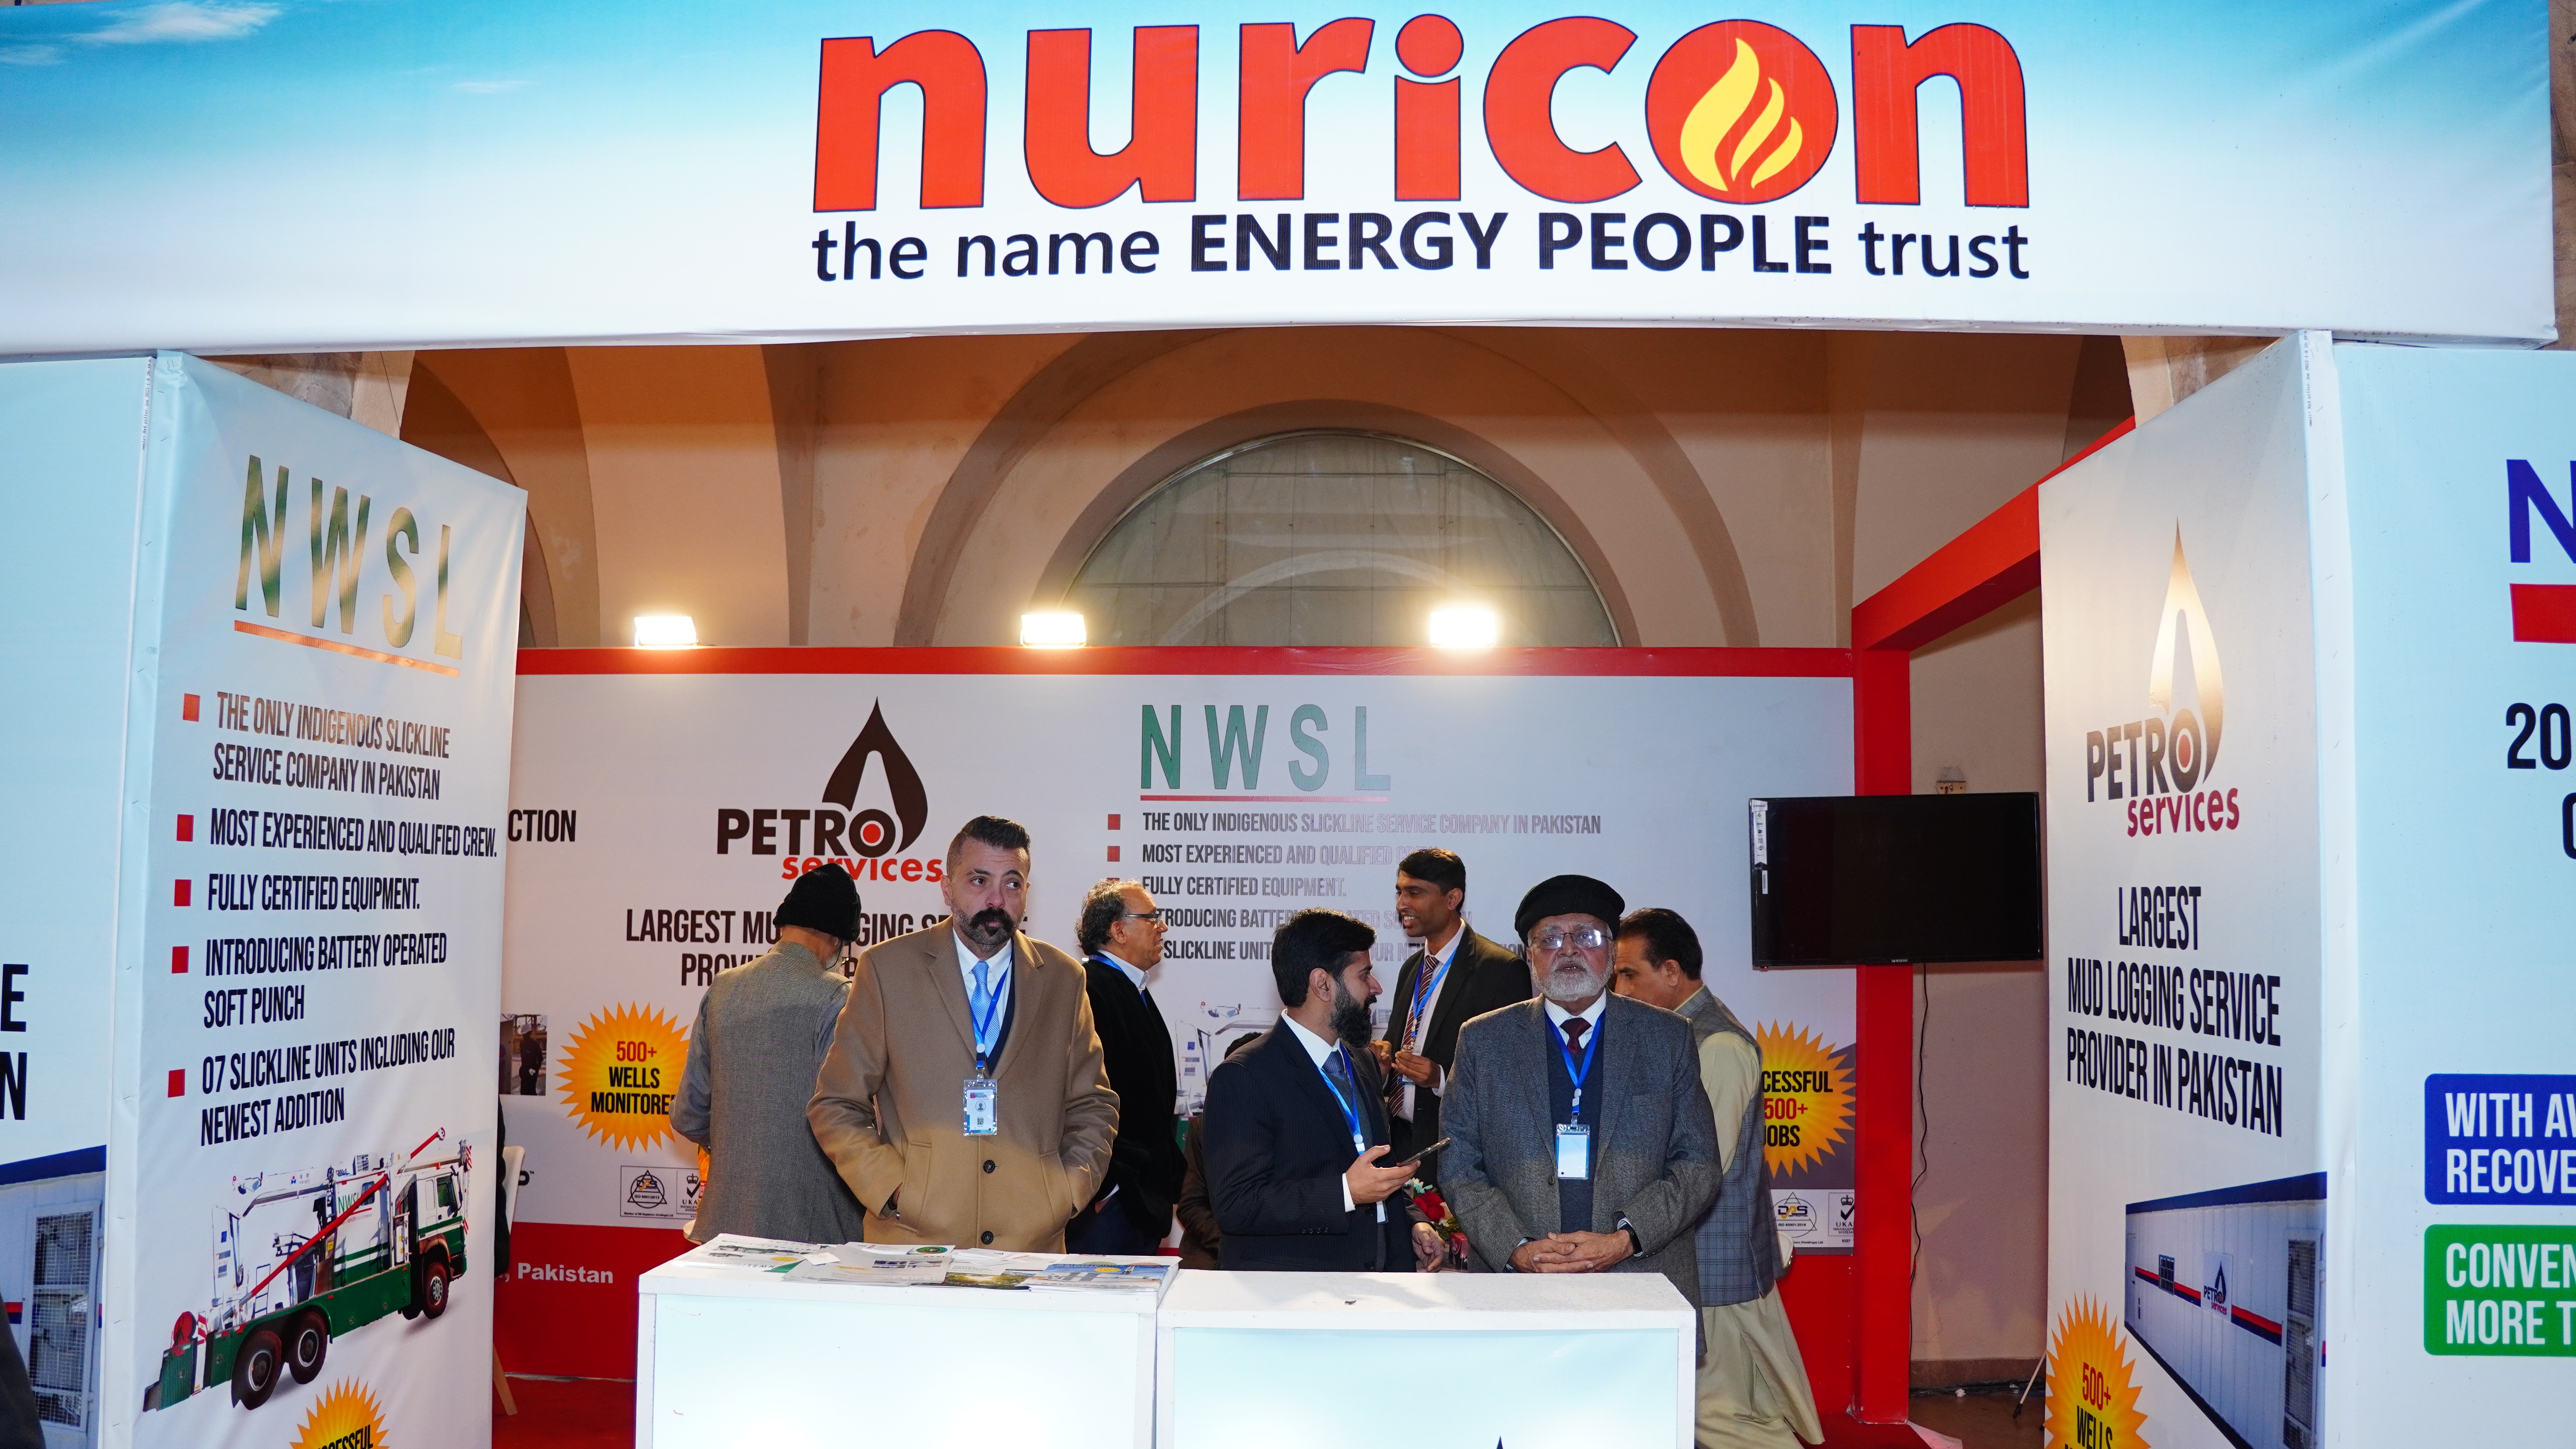 The members of the block of Nuricon:the largest mud logging service provider in Pakistan